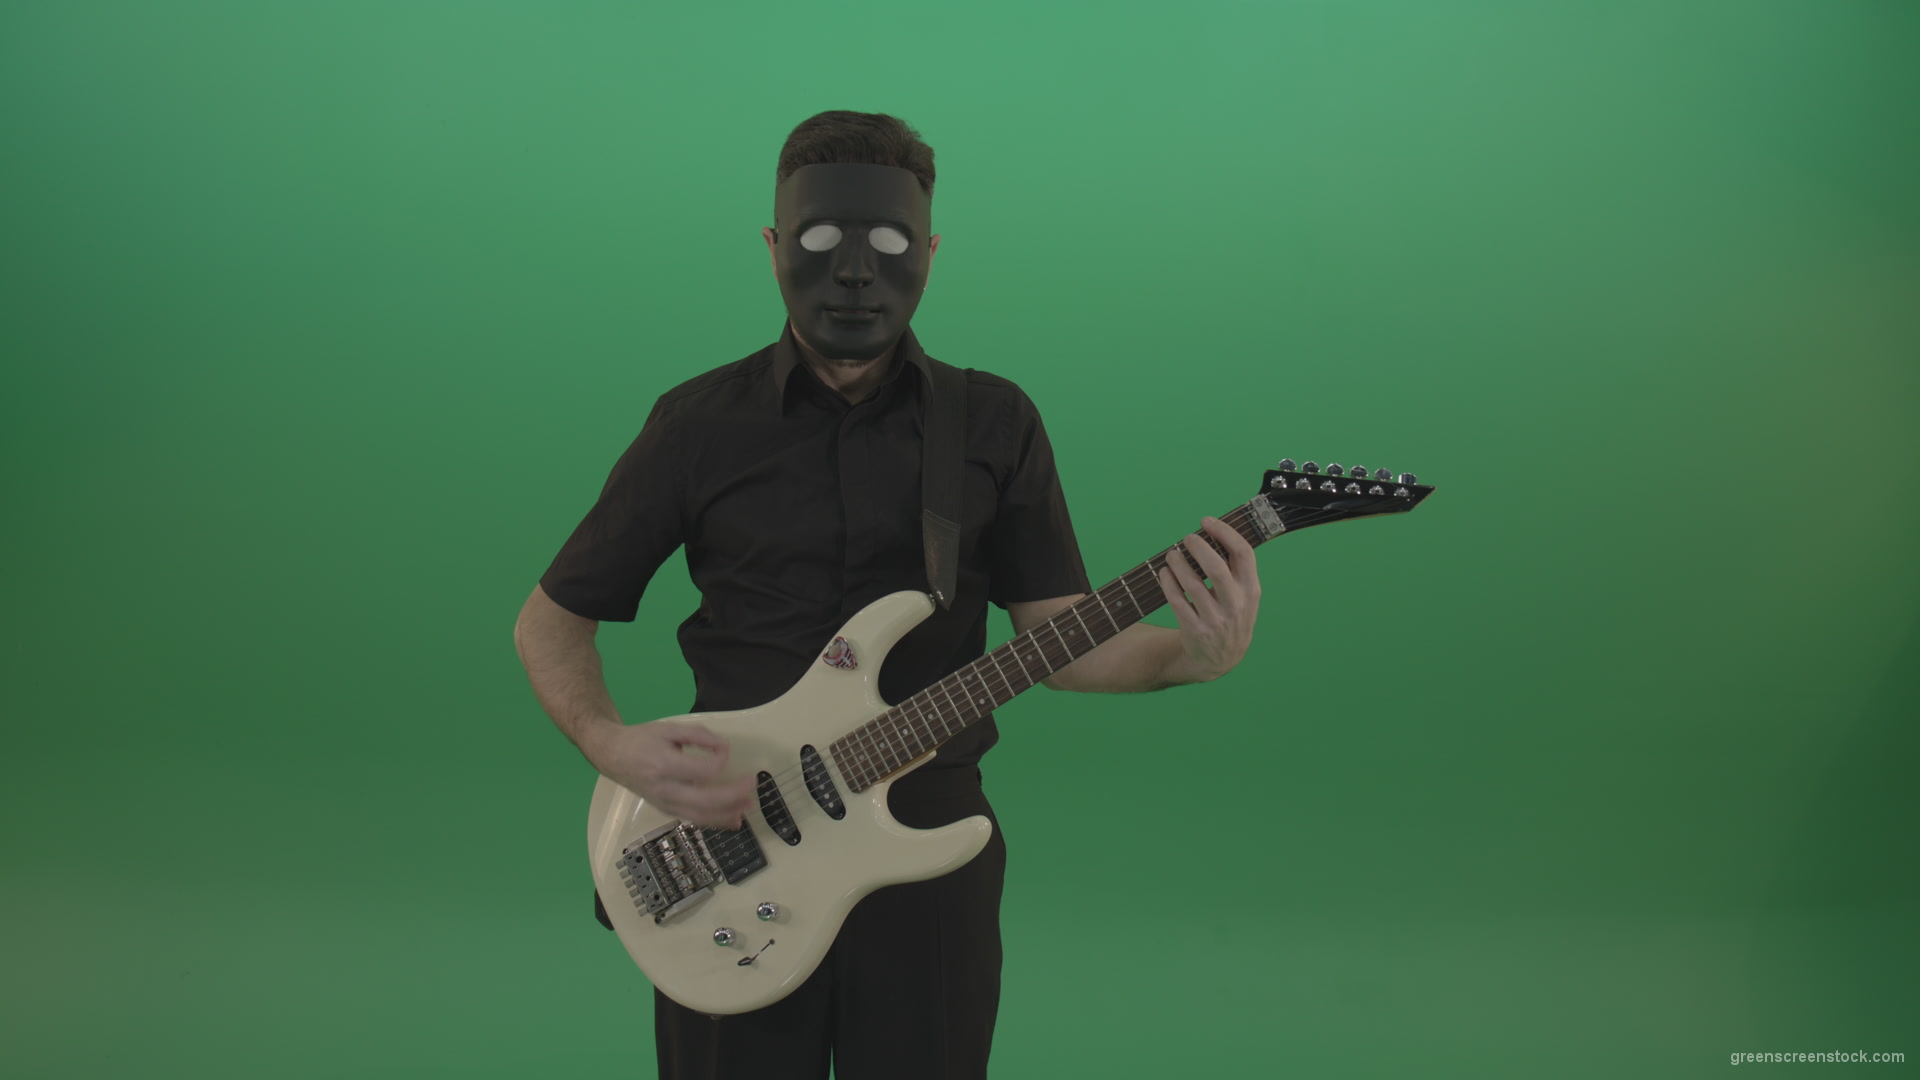 Hard-rock-guitarist-man-playing-white-guitar-in-black-mask-isolated-on-green-background_009 Green Screen Stock